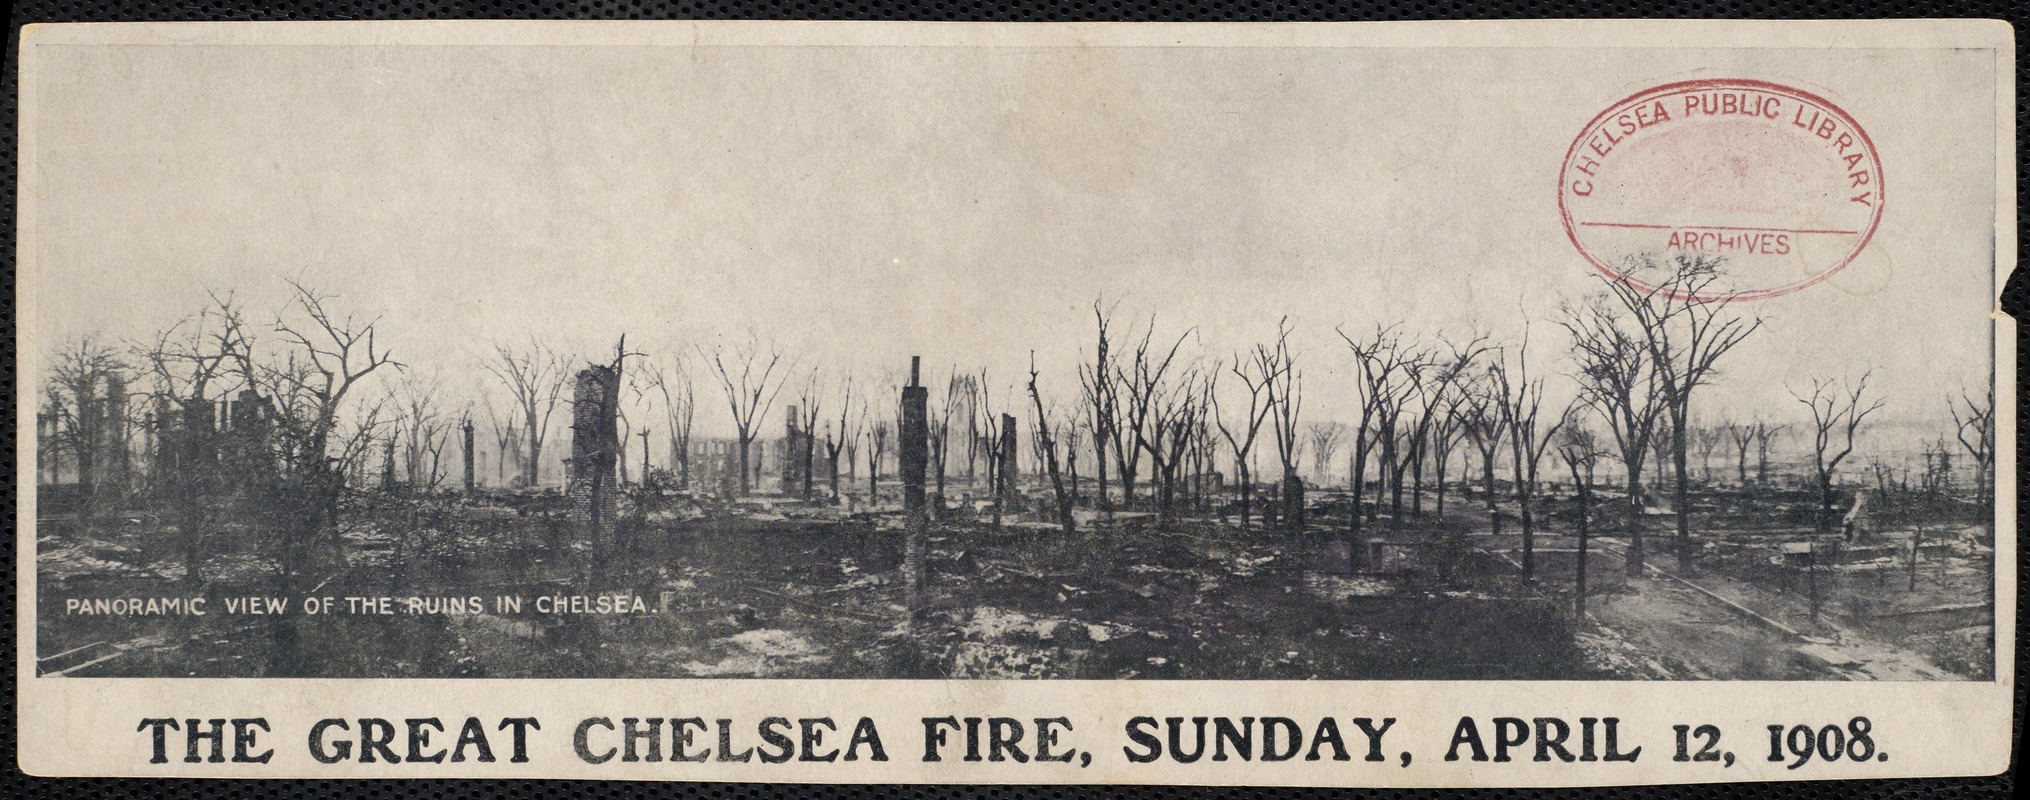 The Great Chelsea Fire, Sunday, April 12, 1908